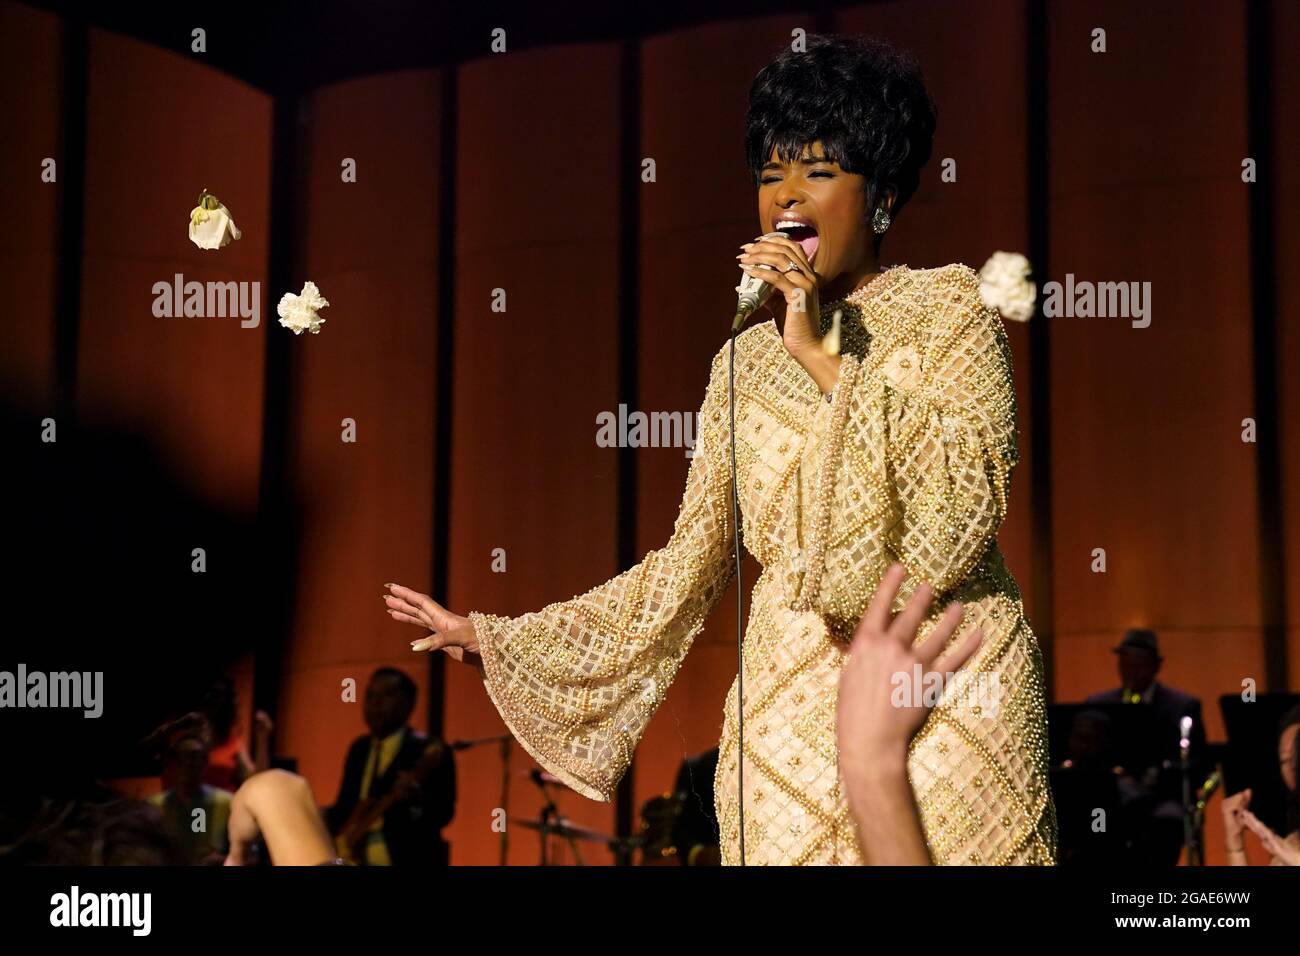 Respect (2020) directed by Liesl Tommy and starring Jennifer Hudson as Aretha Franklin in this biopic about the legendary R&B singer. Stock Photo